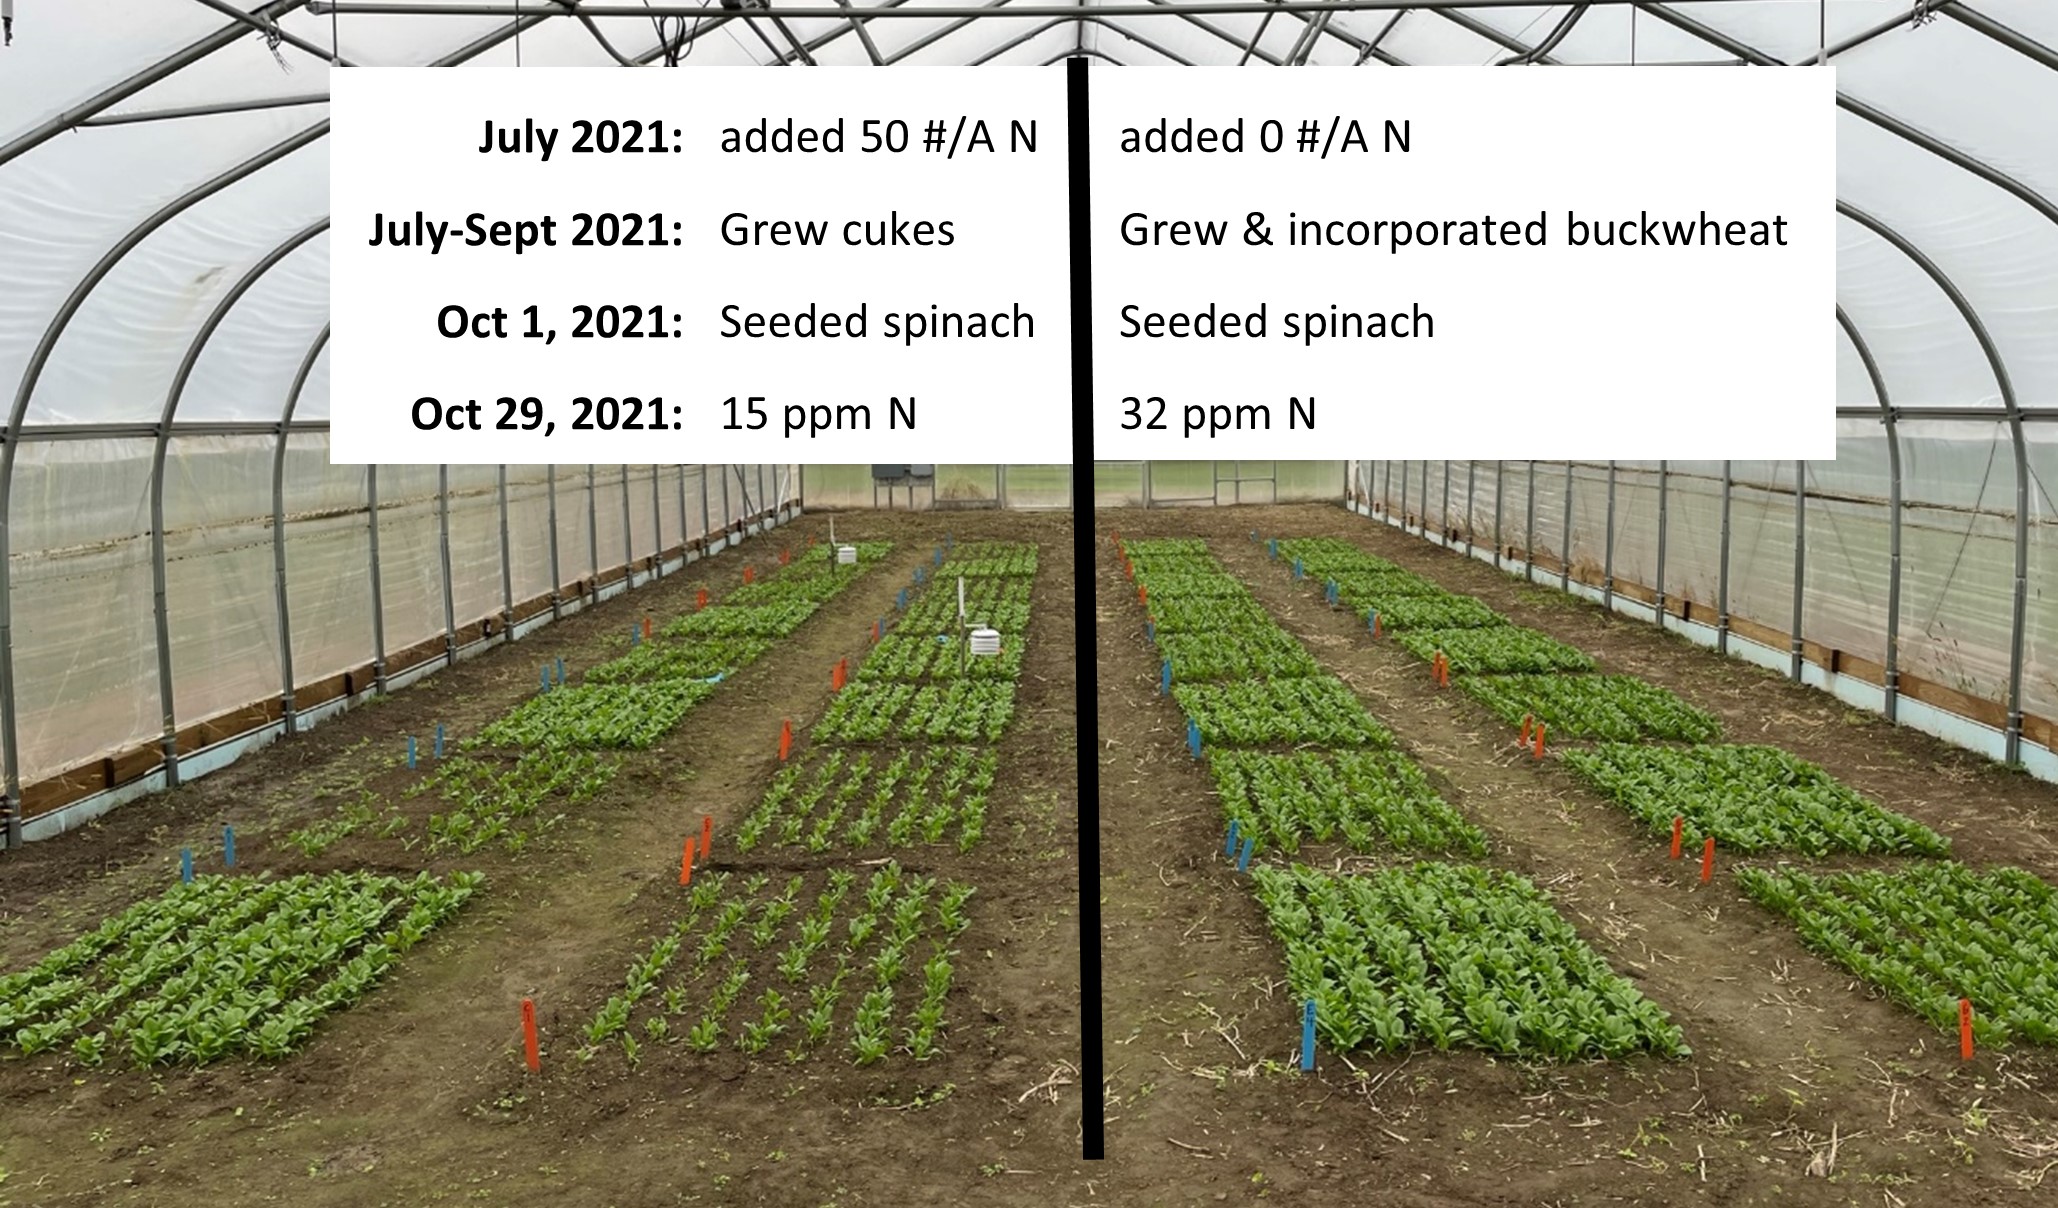 Figure 4. Timeline of nitrogen contributions to both sides of the tunnel. The left side received fertilizer prior to growing cucumbers that were harvested all summer, and had nitrate content of 15 ppm in October 2021. The right side had no fertilizer applied before buckwheat was planted and grown all summer, and had nitrate content of 32 ppm in October 21, more than double that of the cucumber side.